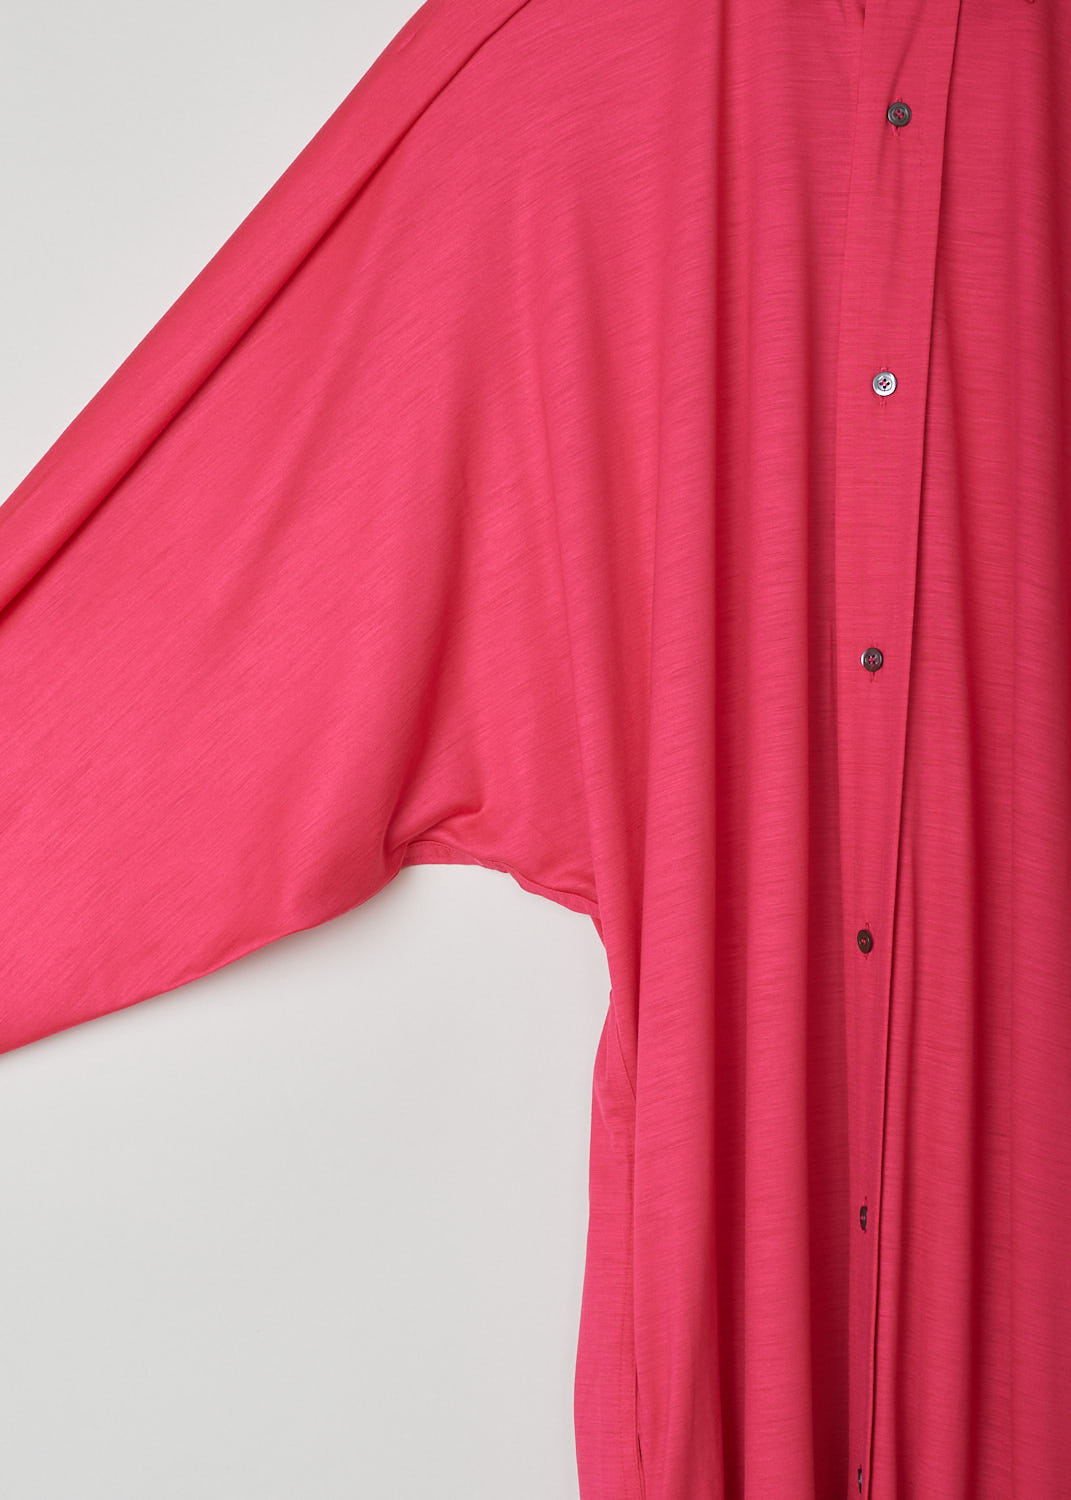 SOFIE Dâ€™HOORE, FUCHSIA COLORED SHIRT DRESS, DUMAS_WOJE_FUCHSIA, Pink, Detail, This mid-length fuchsia shirt dress features a classic collar, front button closure and dolman sleeves with buttoned cuffs. Side pockets can be found concealed in the seam.
